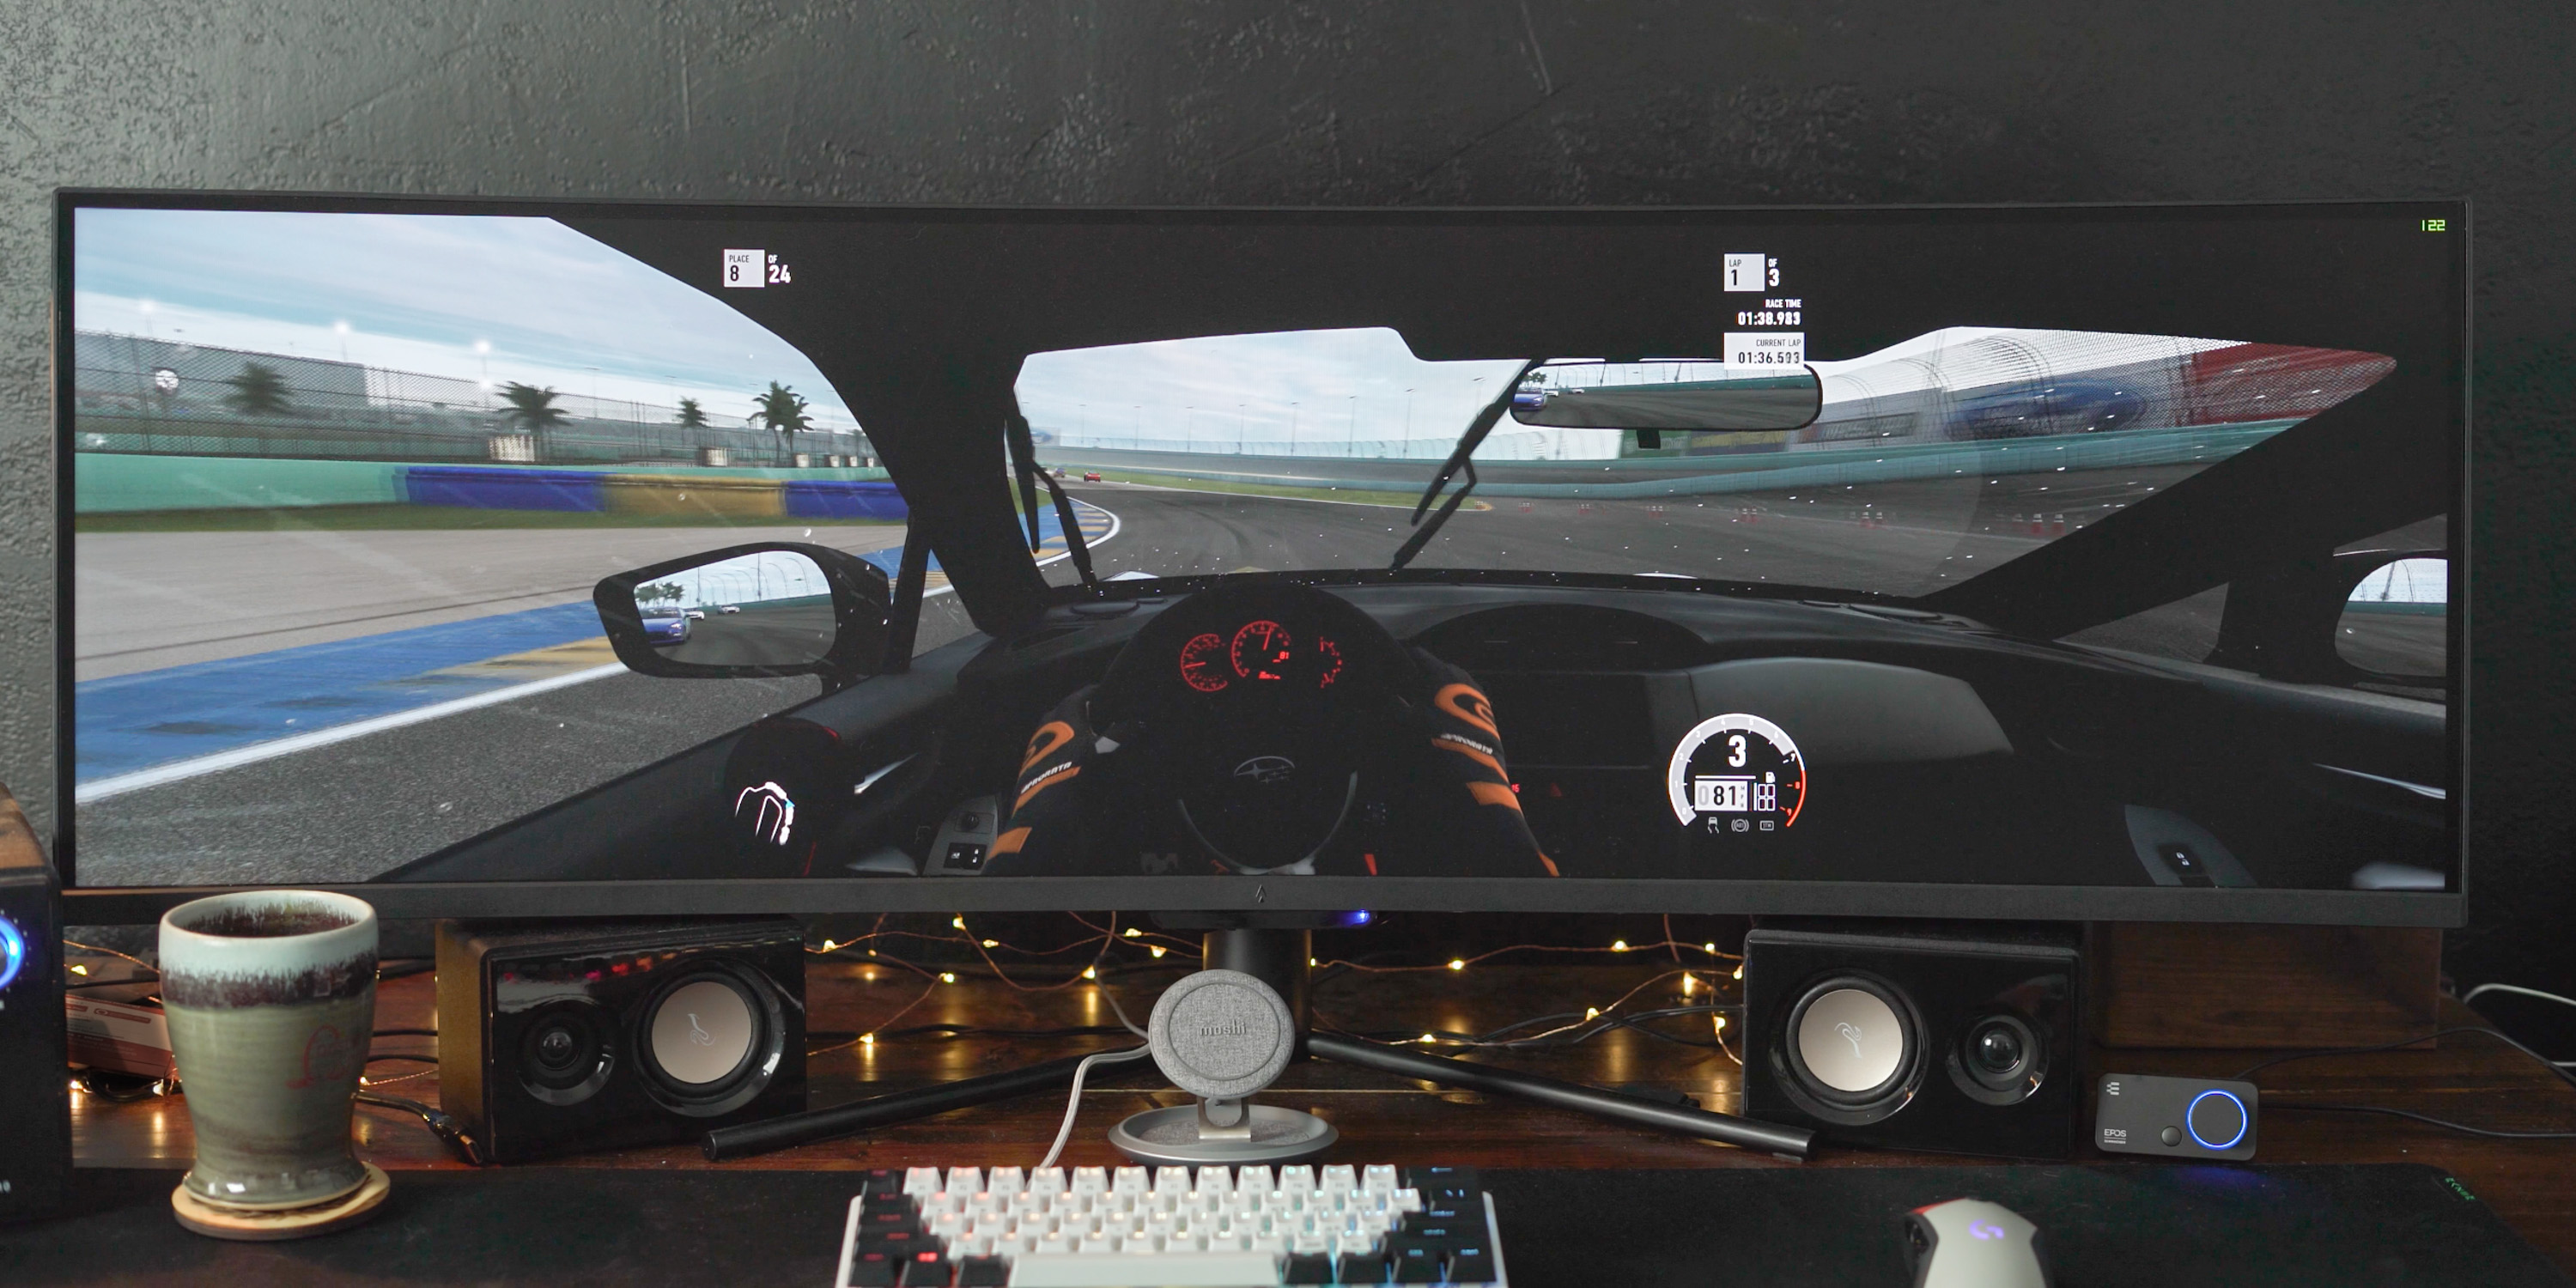 Playing Forza 7 at full resolution on the Dark Matter 49-inch gaming monitor